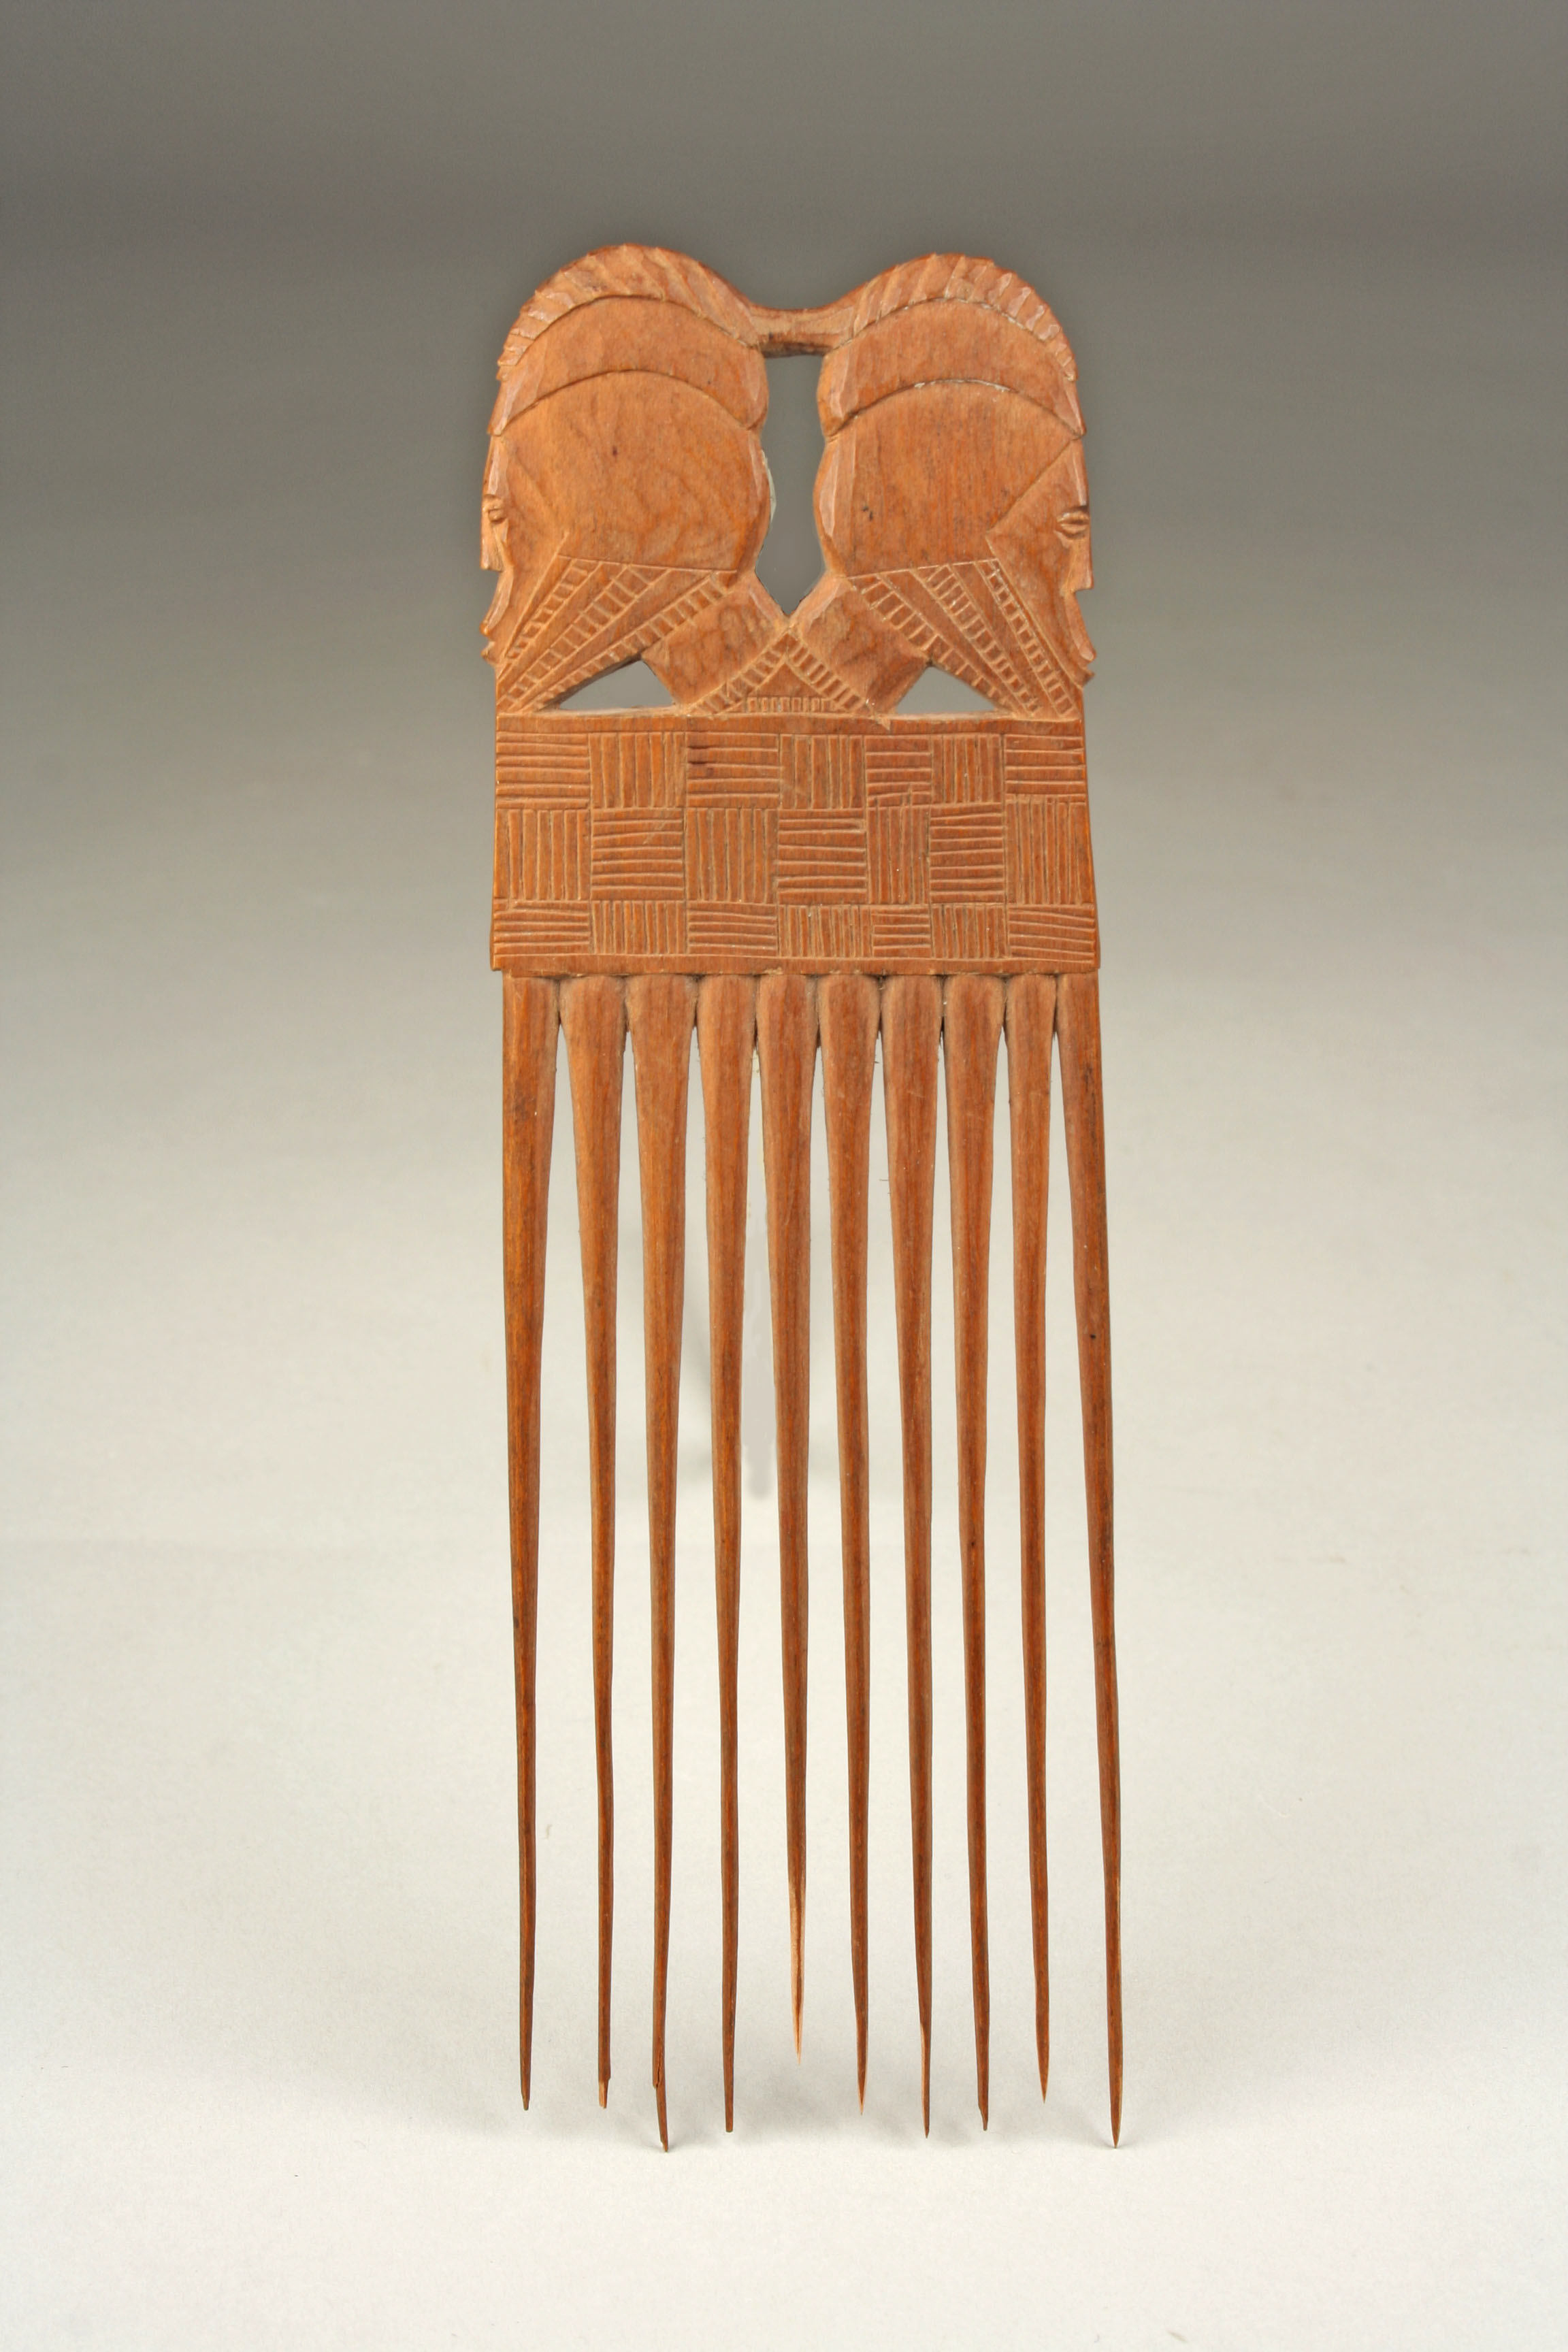 Weaving comb  Smithsonian Institution